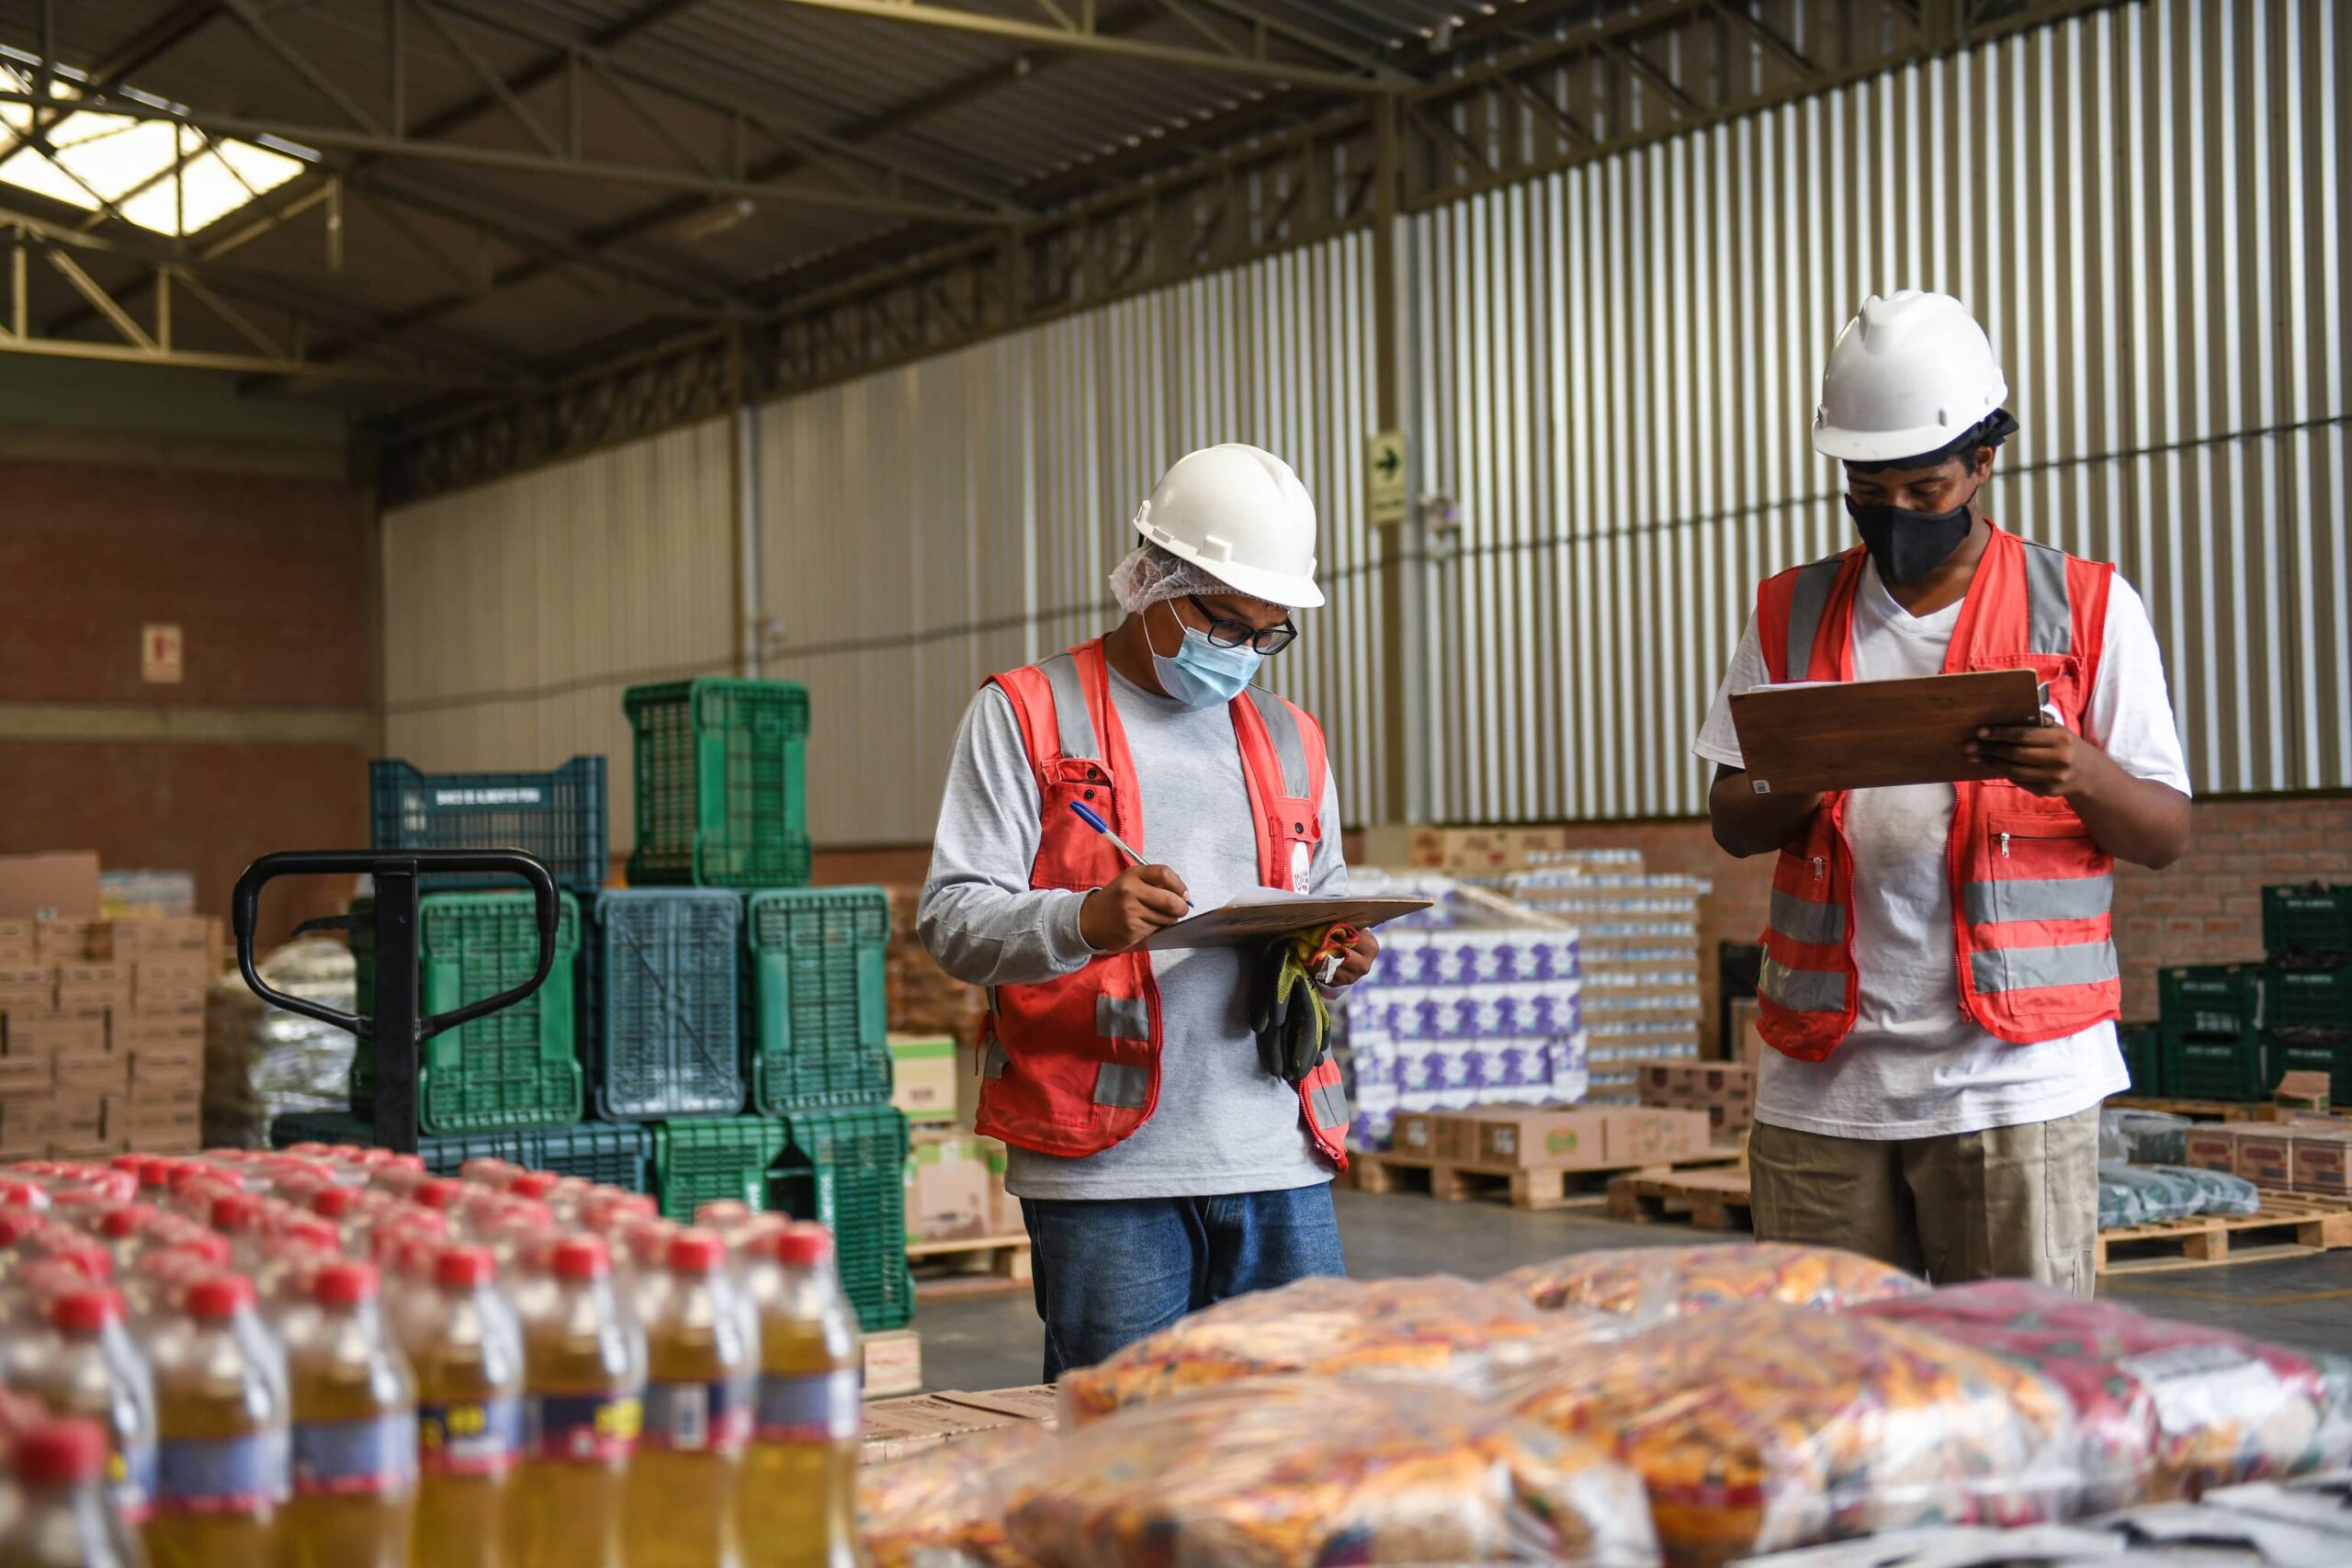 Staff from Banco de Alimentos Perú (BAP) review the inventory of food in the warehouse.